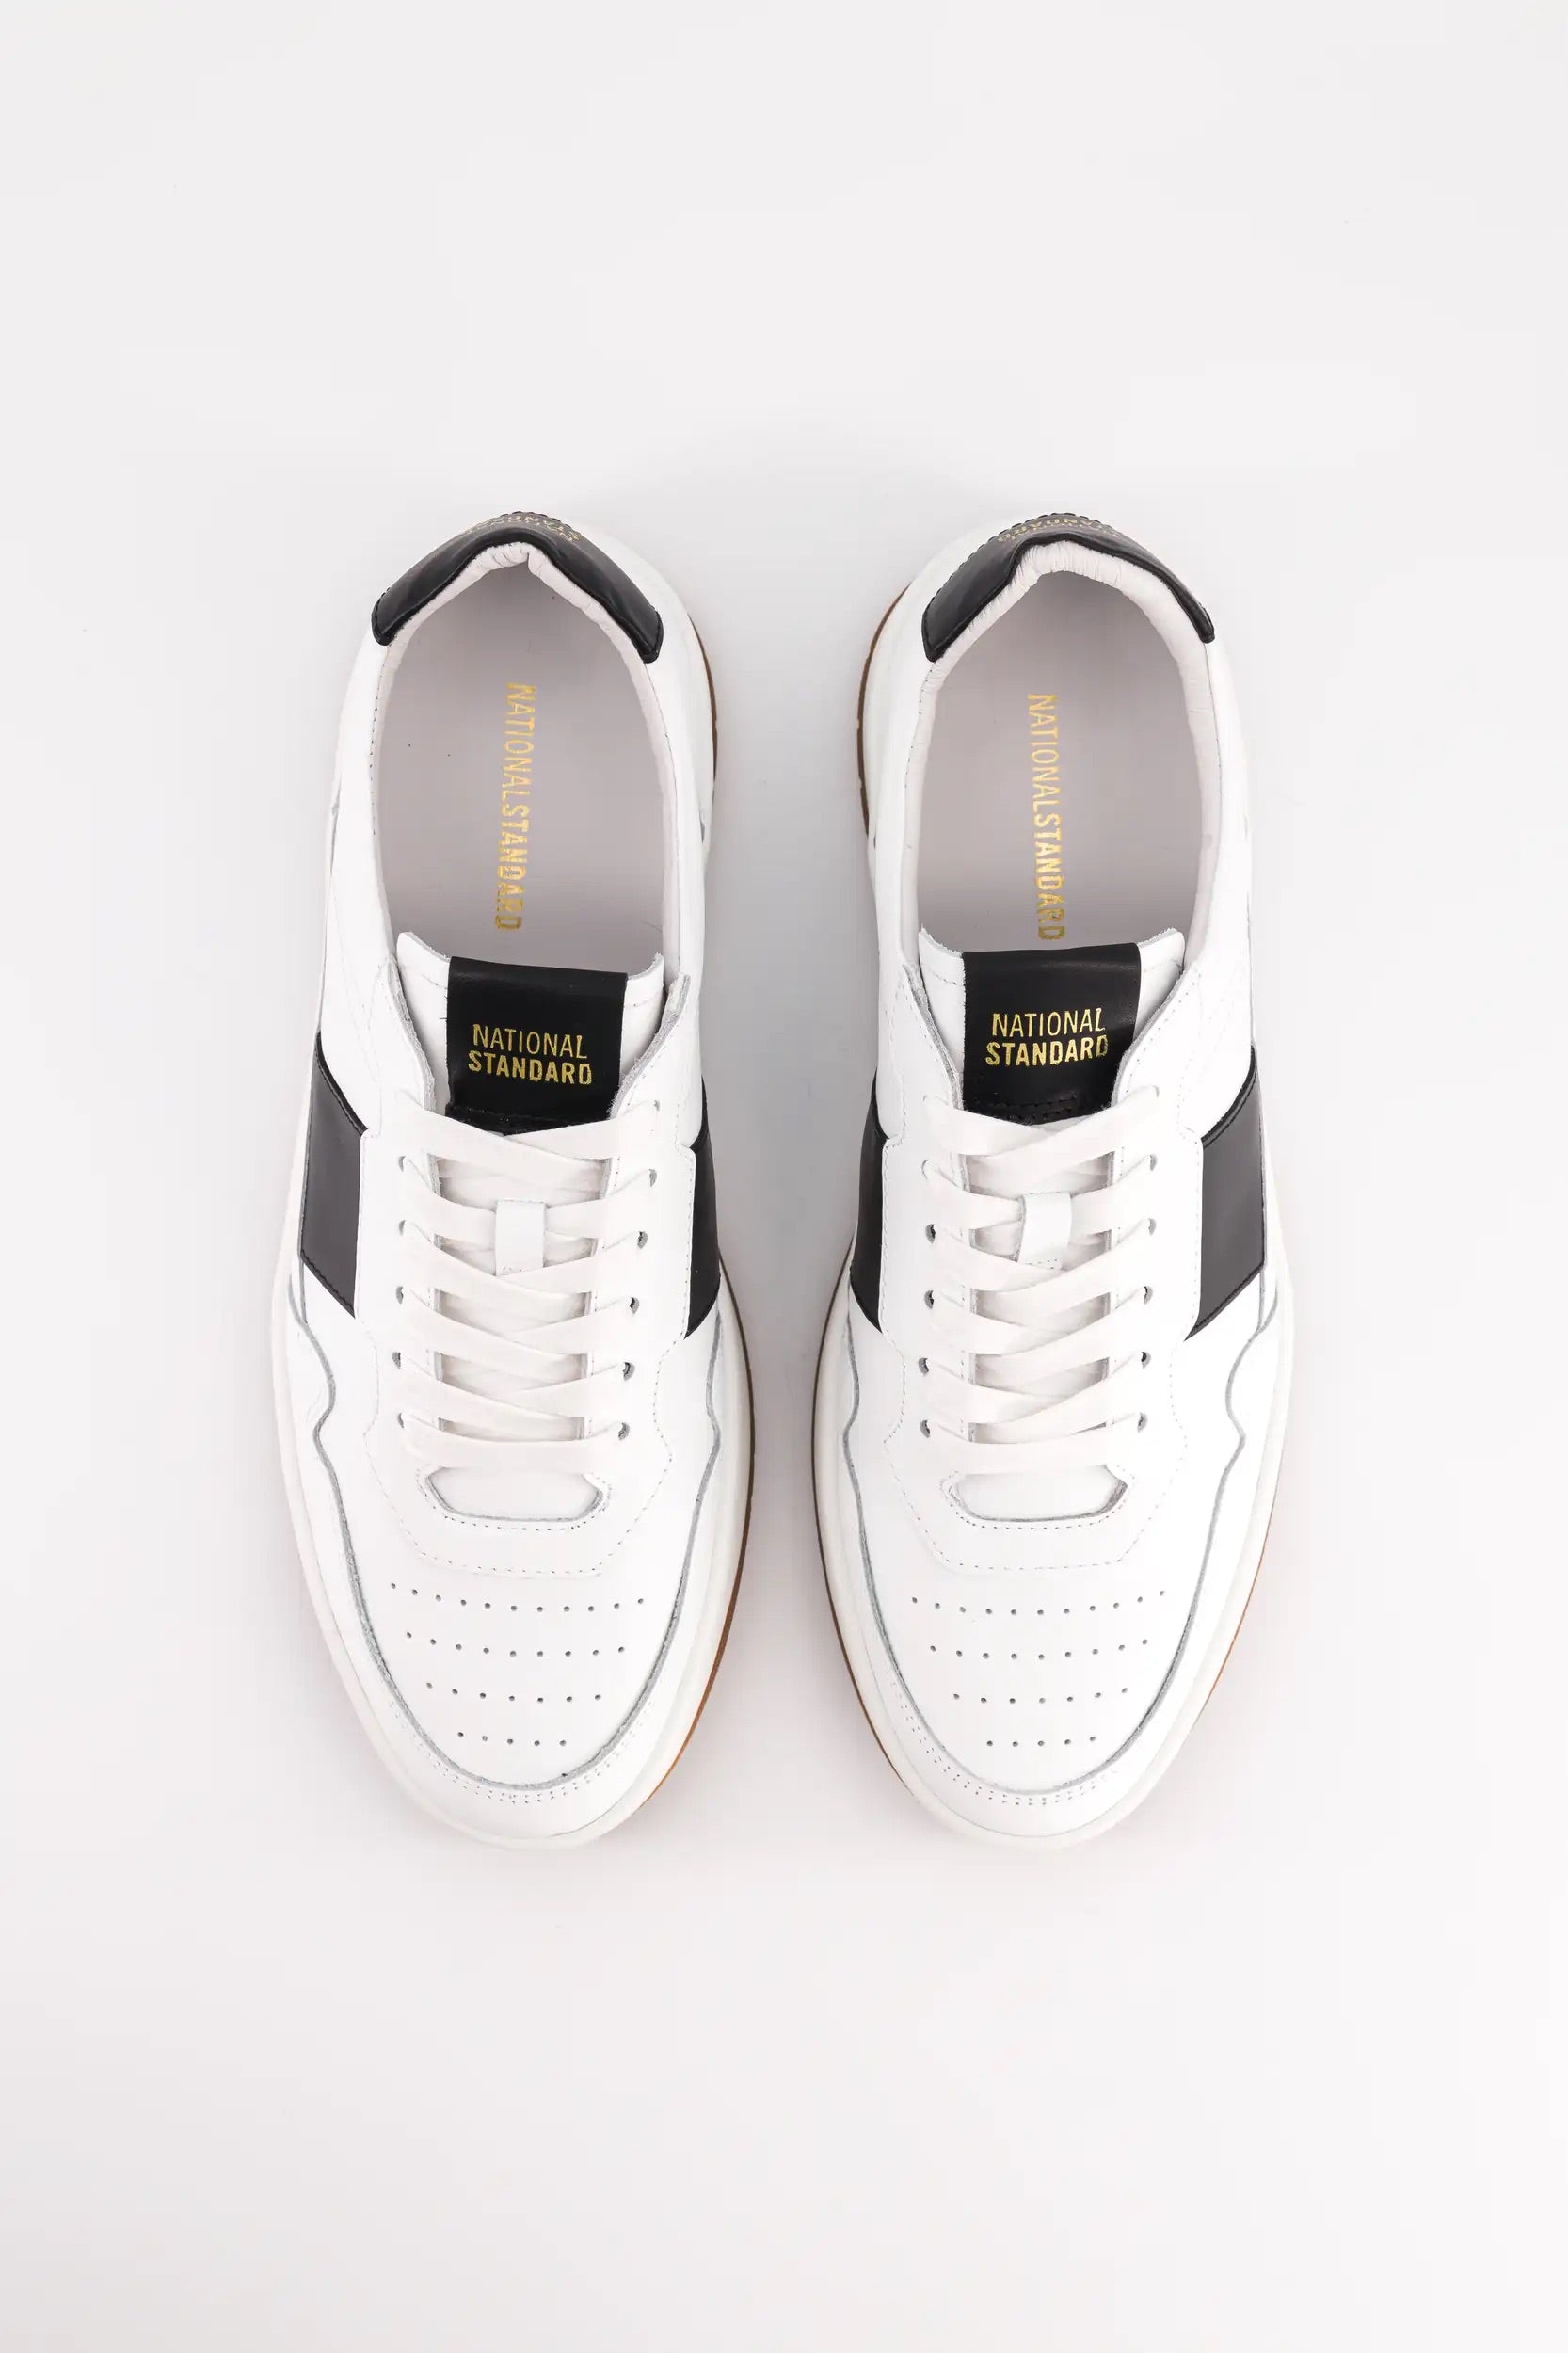 Edition 6 Low-Top Sneakers Black Band